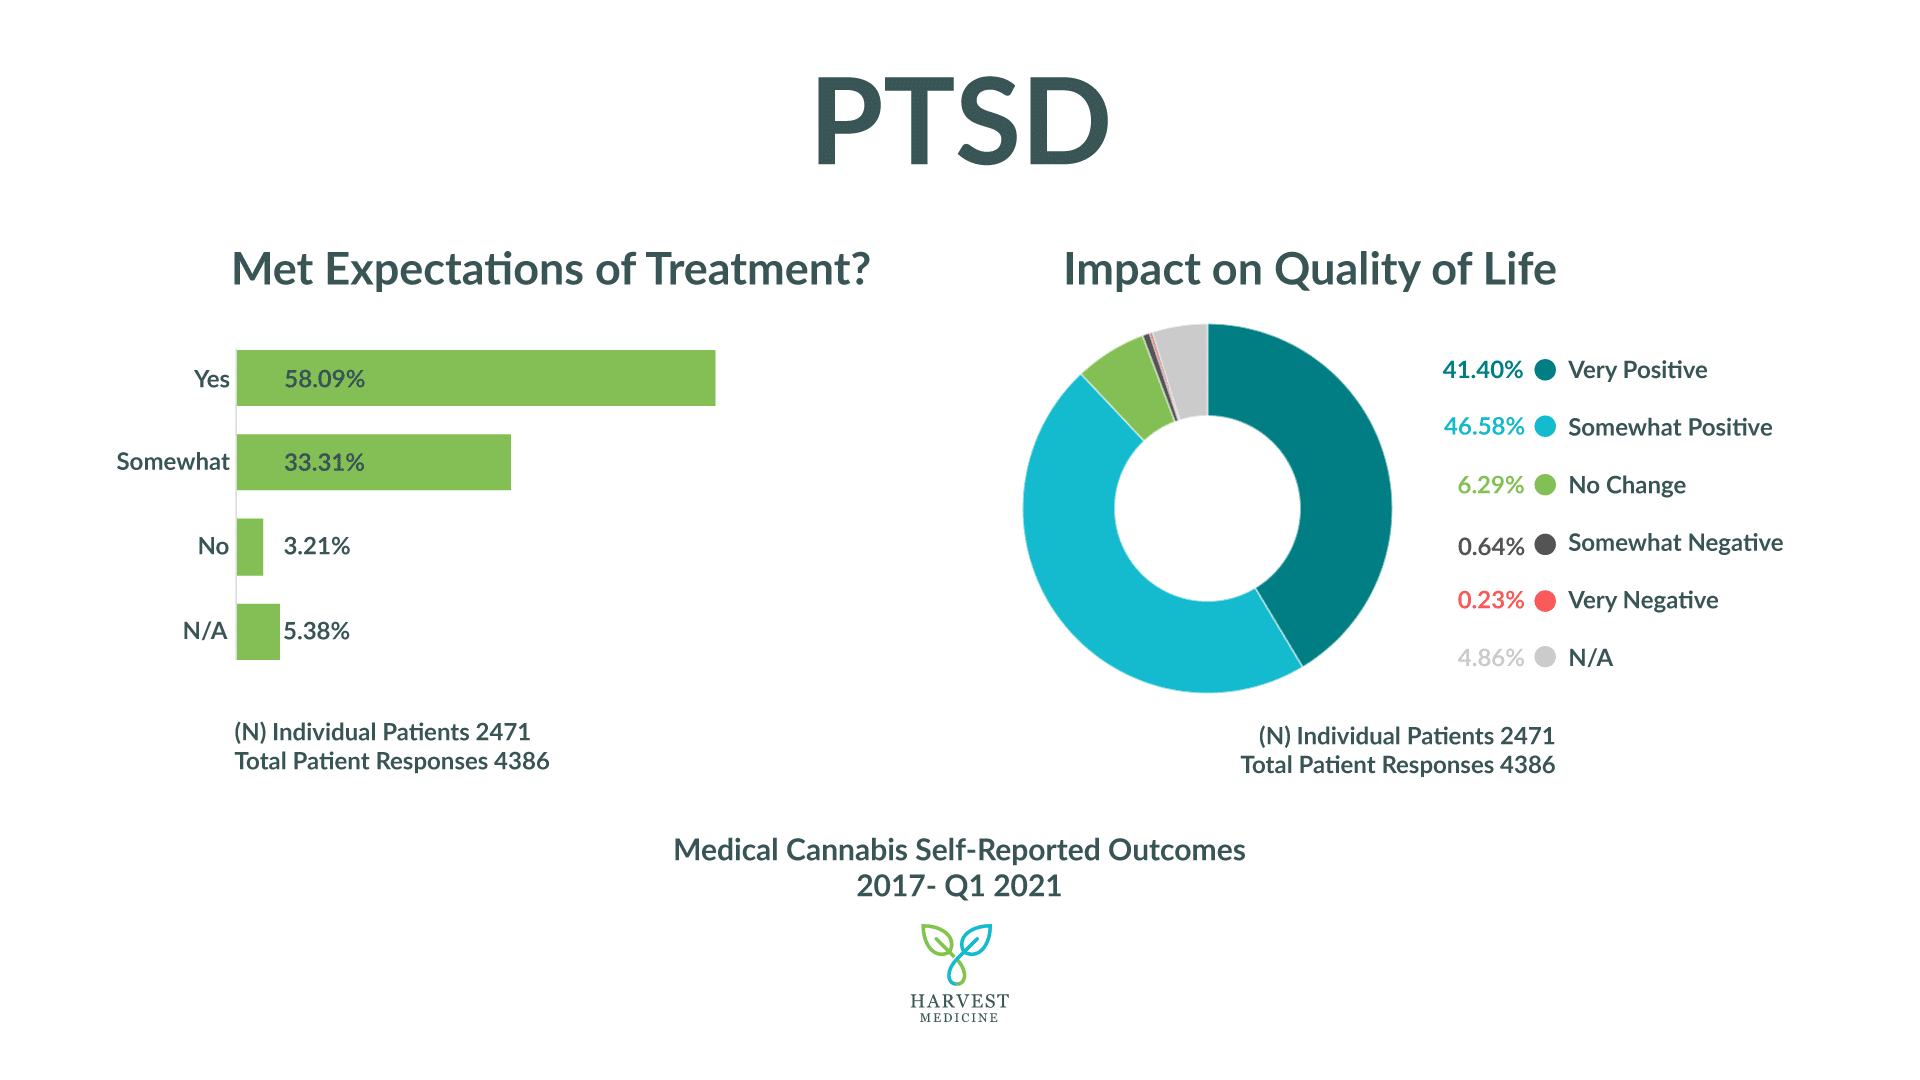 Harvest Medicine's patient self-reported outcomes for PTSD from 2017-2021. Sample size 2471